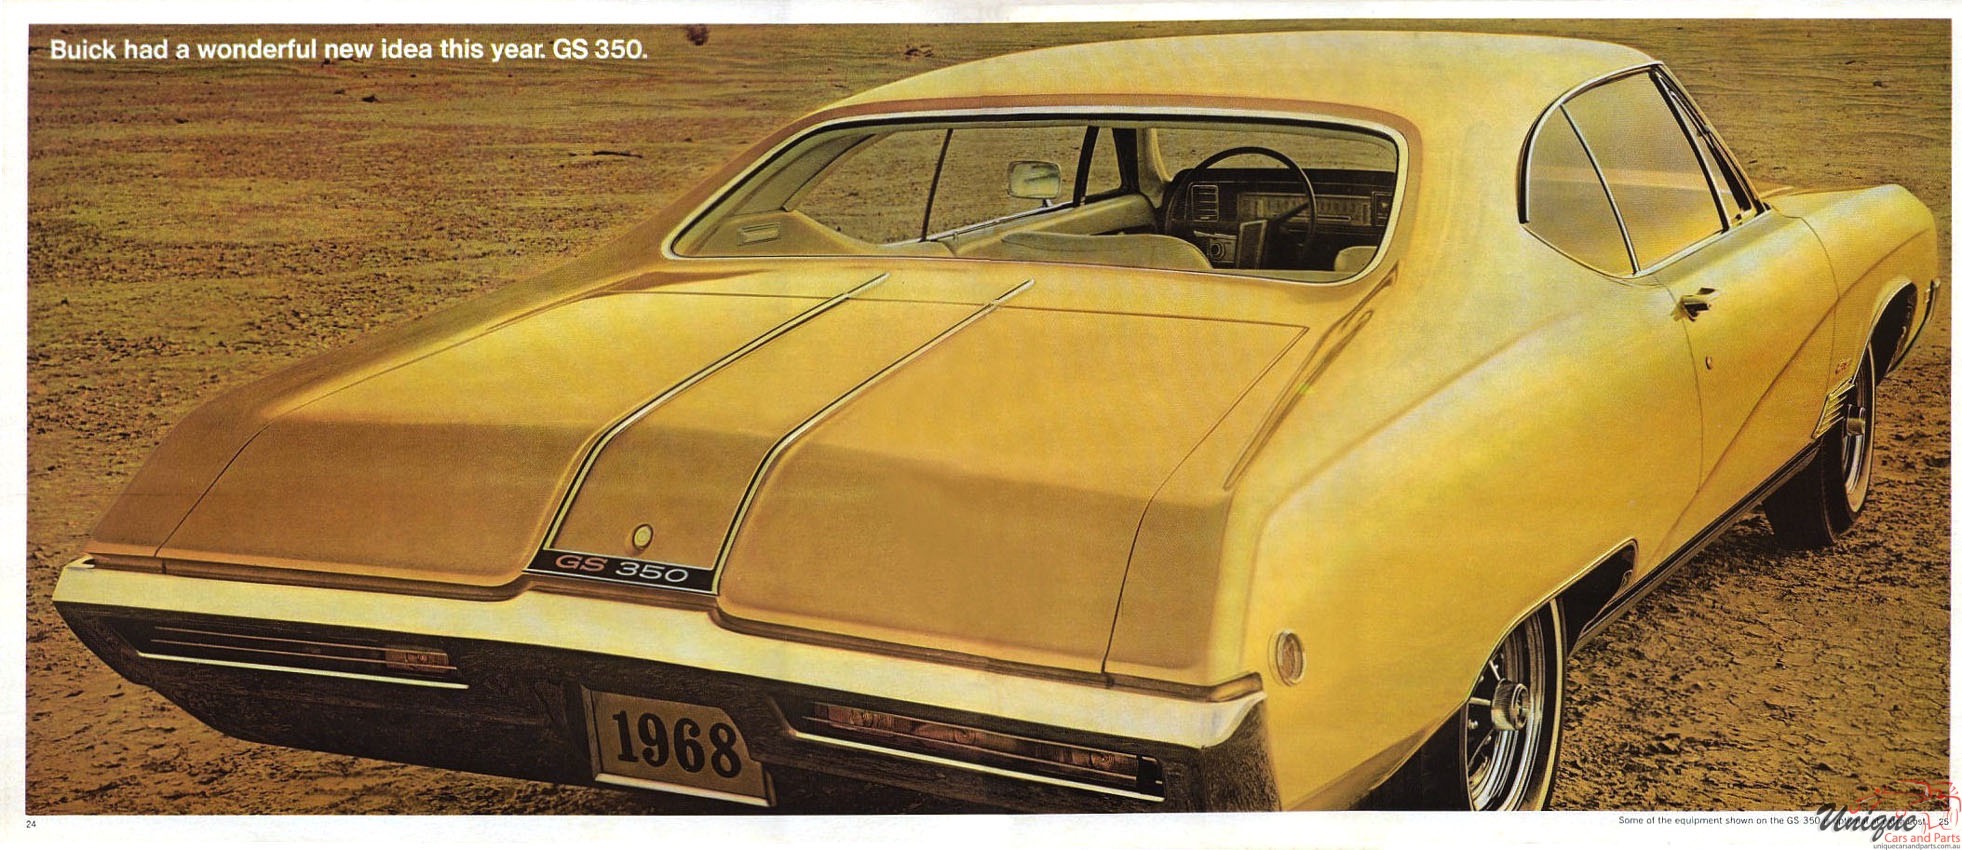 1968 Buick Car Brochure Page 1